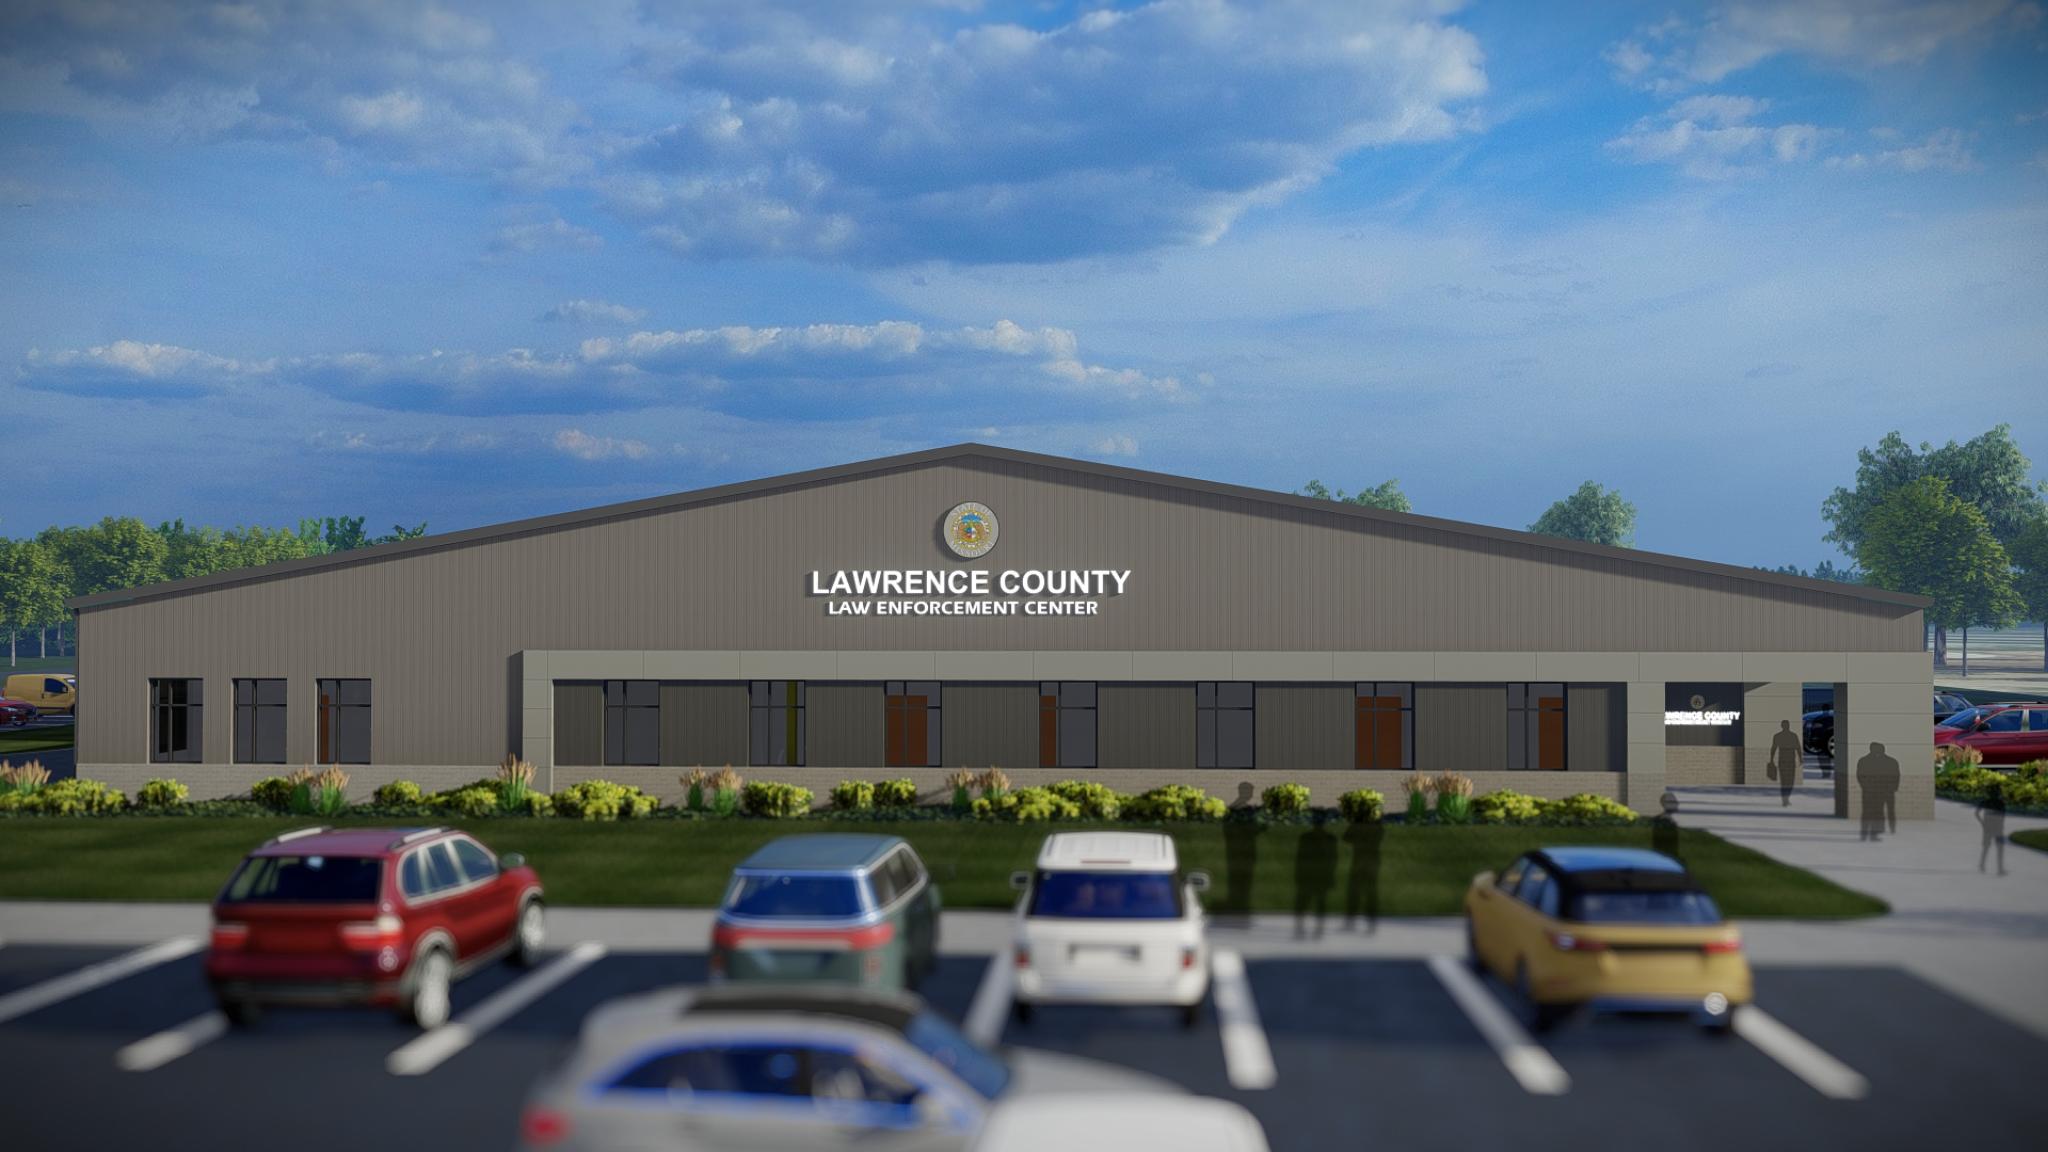 Rendering of Lawrence County (Missouri) Law Enforcement Center